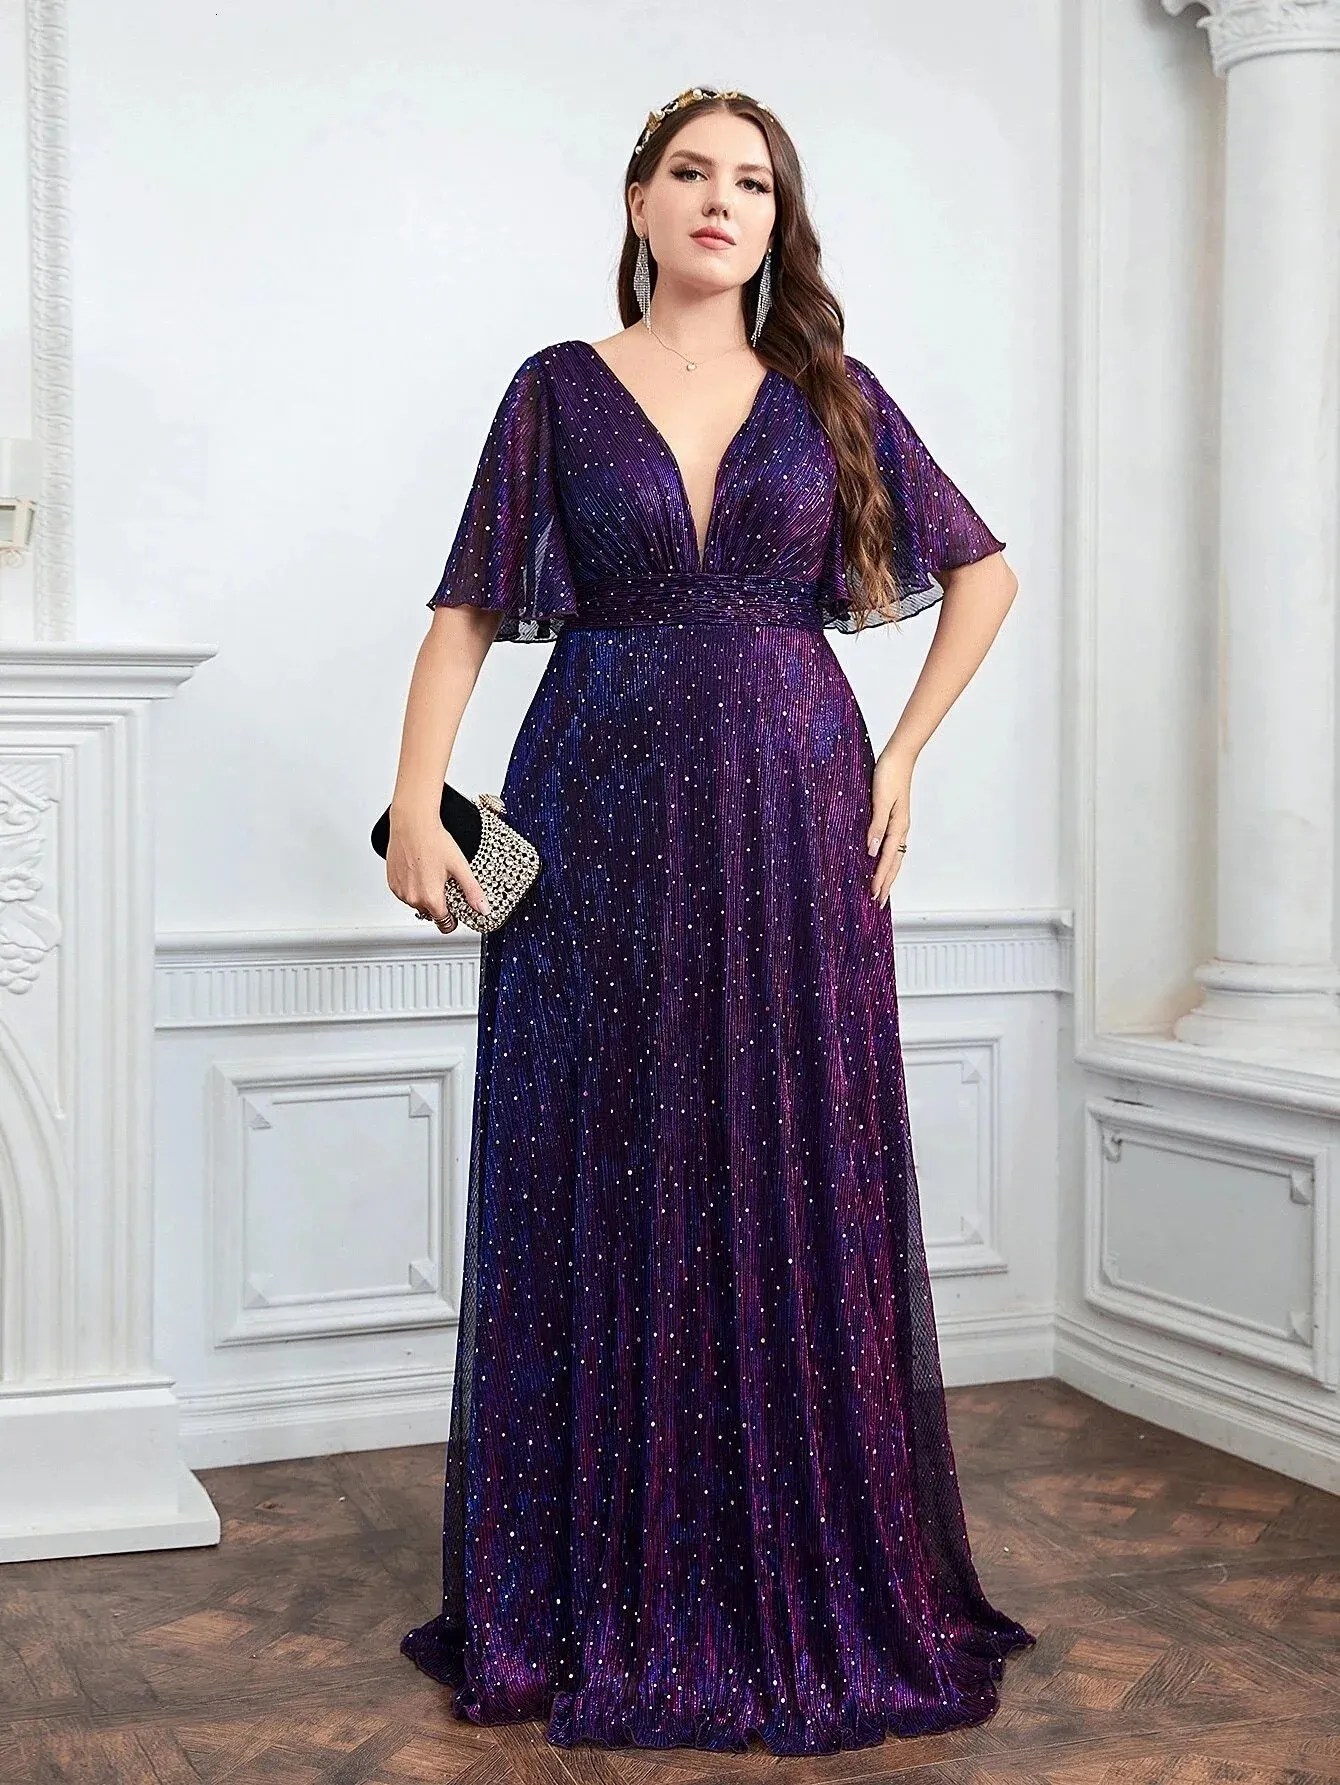 Wedding Bridesmaid Dress For Plus Size Female Fashion Plunging Neck Butterfly Sleeve Glitter Party Dresses Large Size Lady Dress 240313